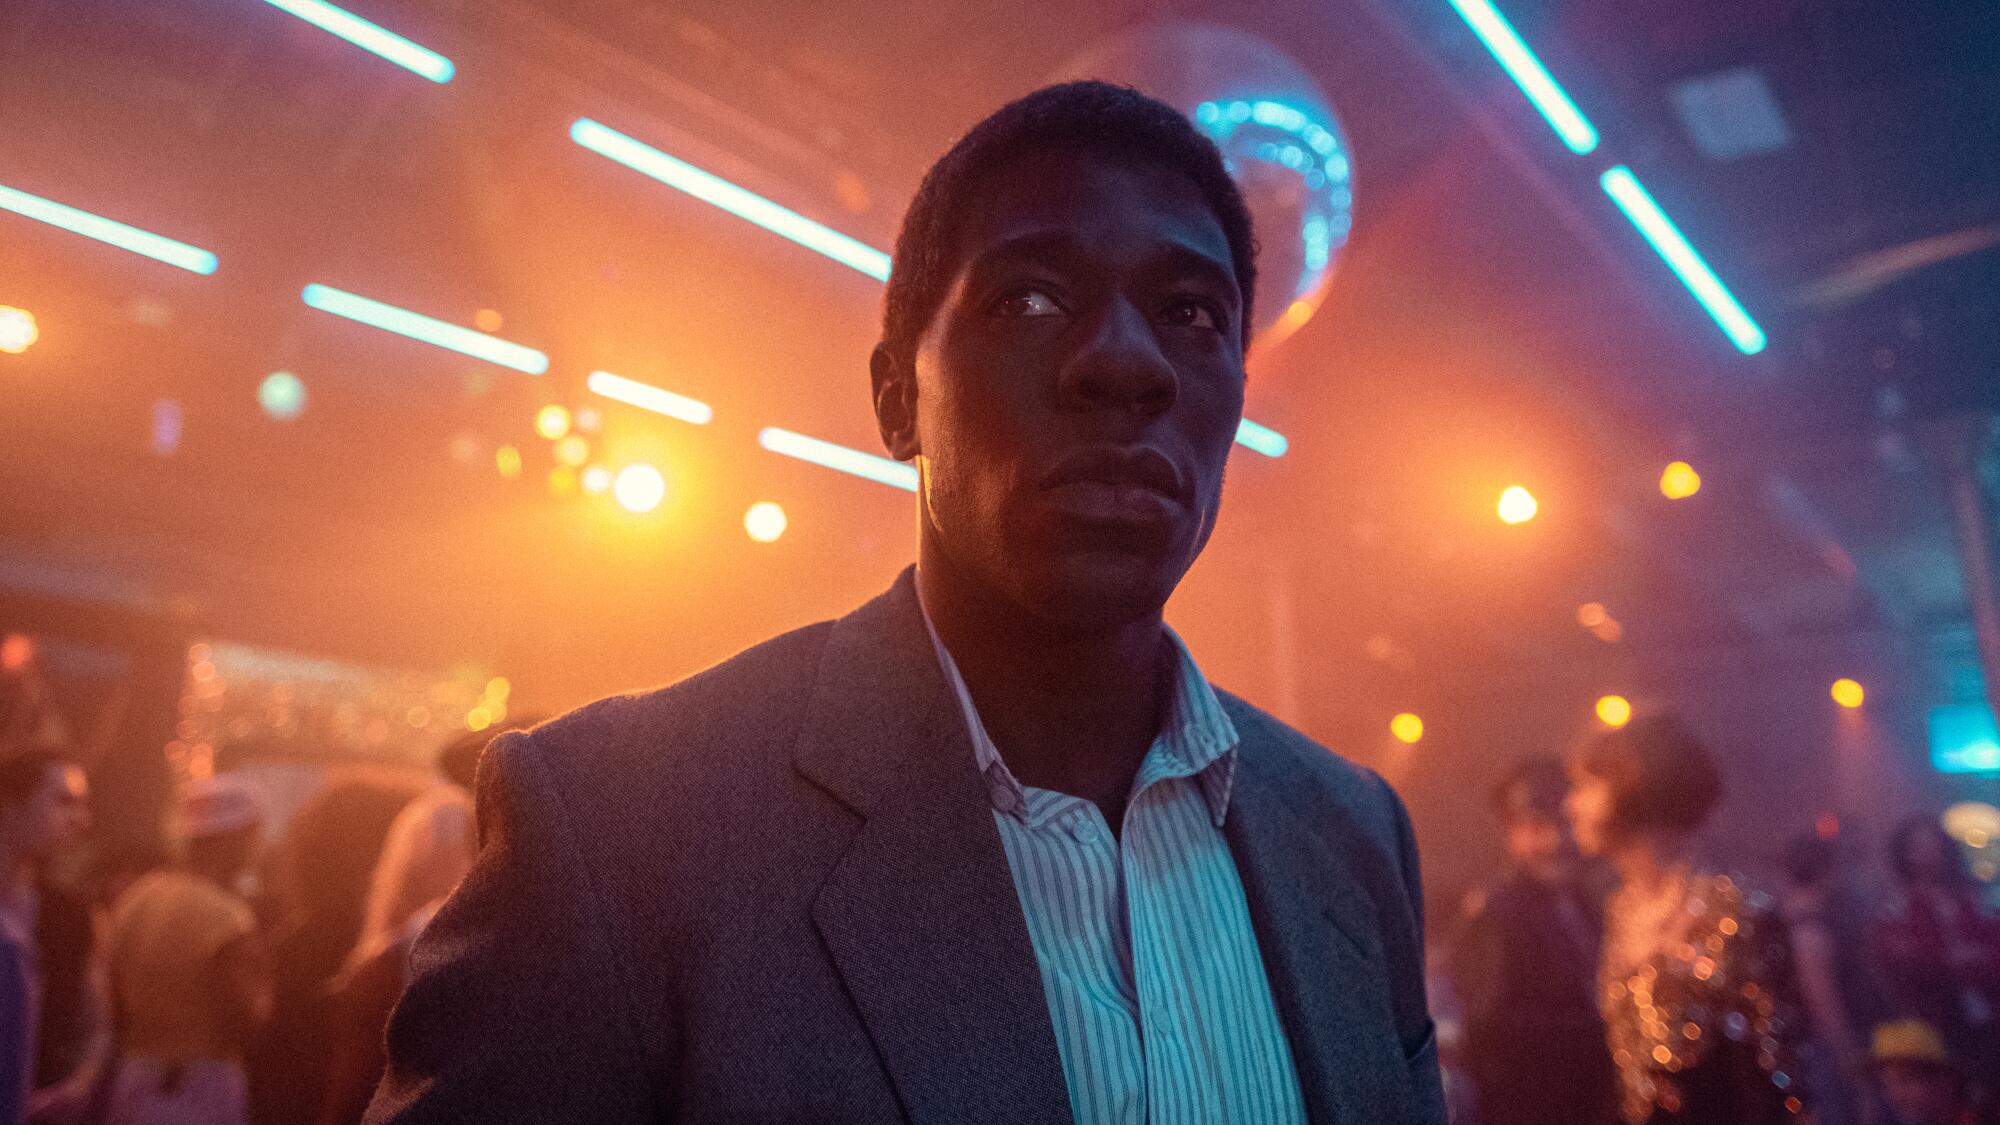 A man in a shirt and jacket stands in a nightclub.